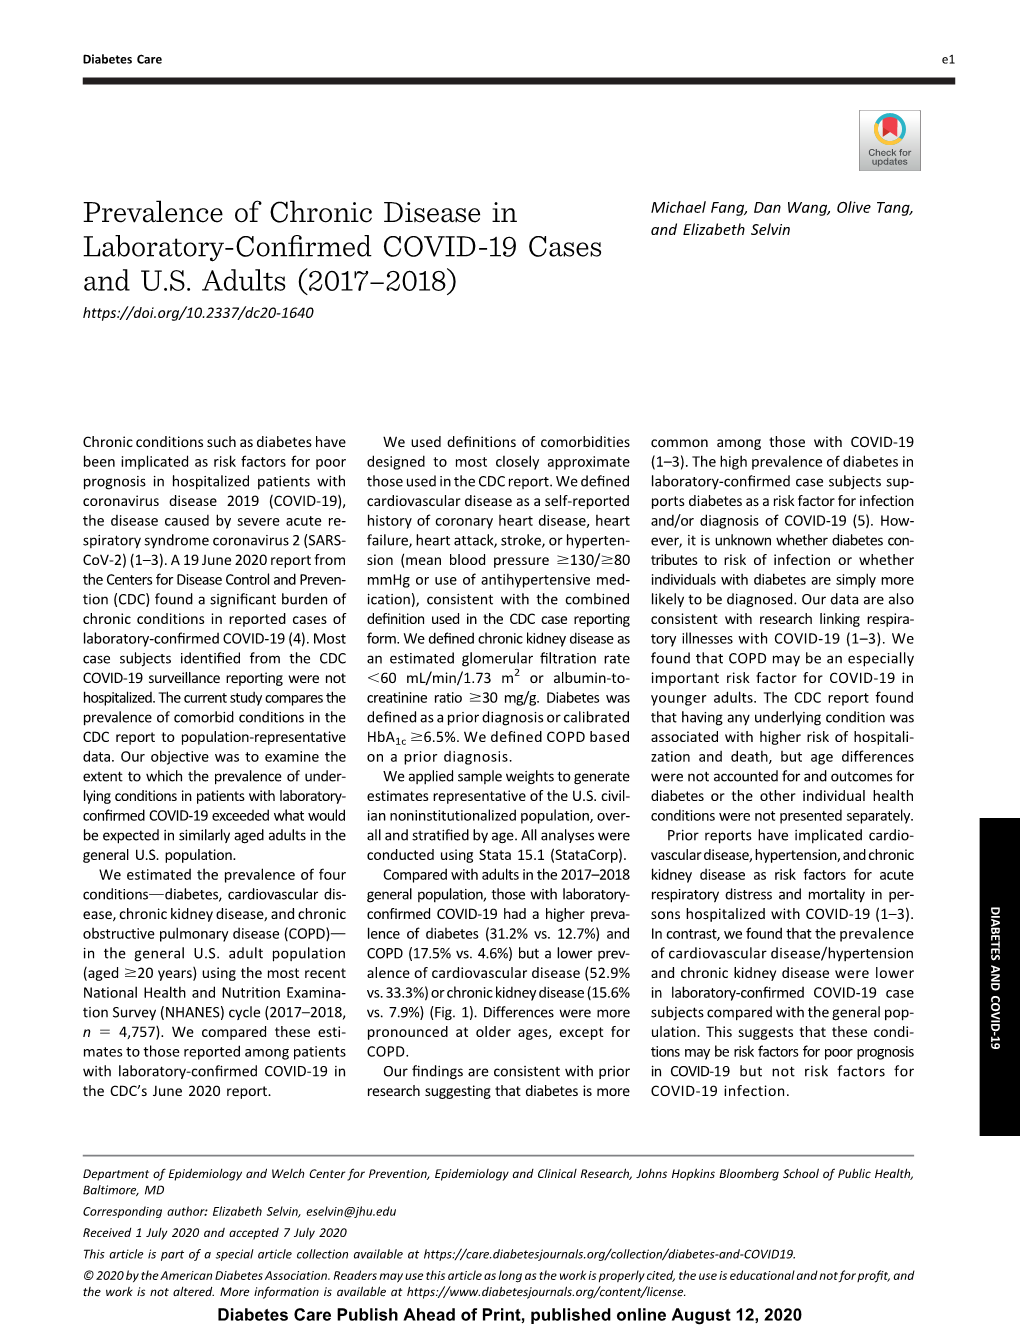 Prevalence of Chronic Disease in Laboratory